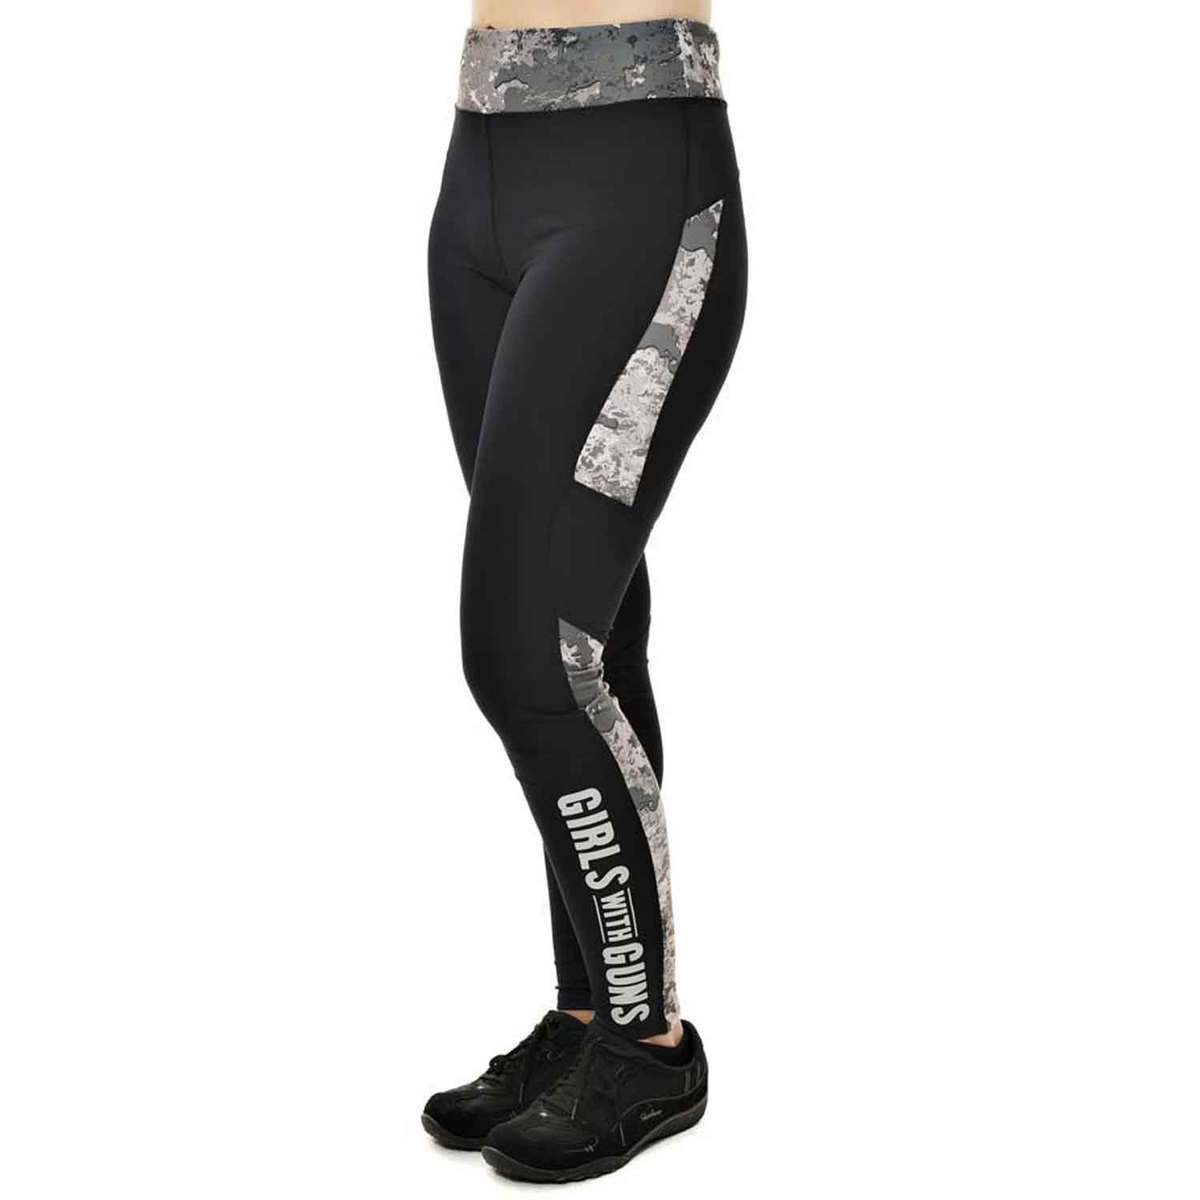 H&m Athletic Leggings Women's  International Society of Precision  Agriculture